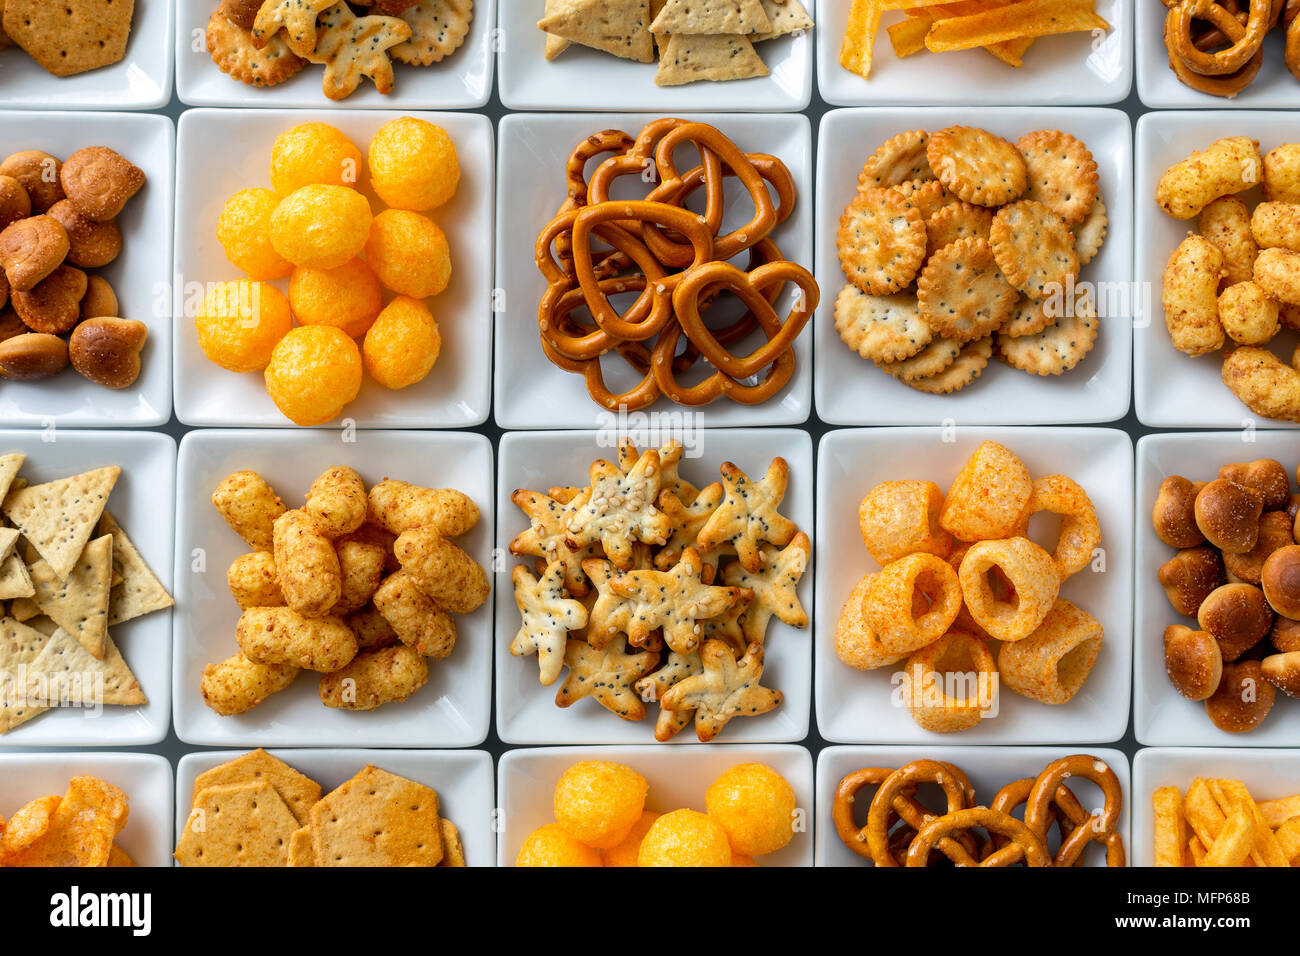 Background of many types of savory snacks in white square dishes from above. Stock Photo